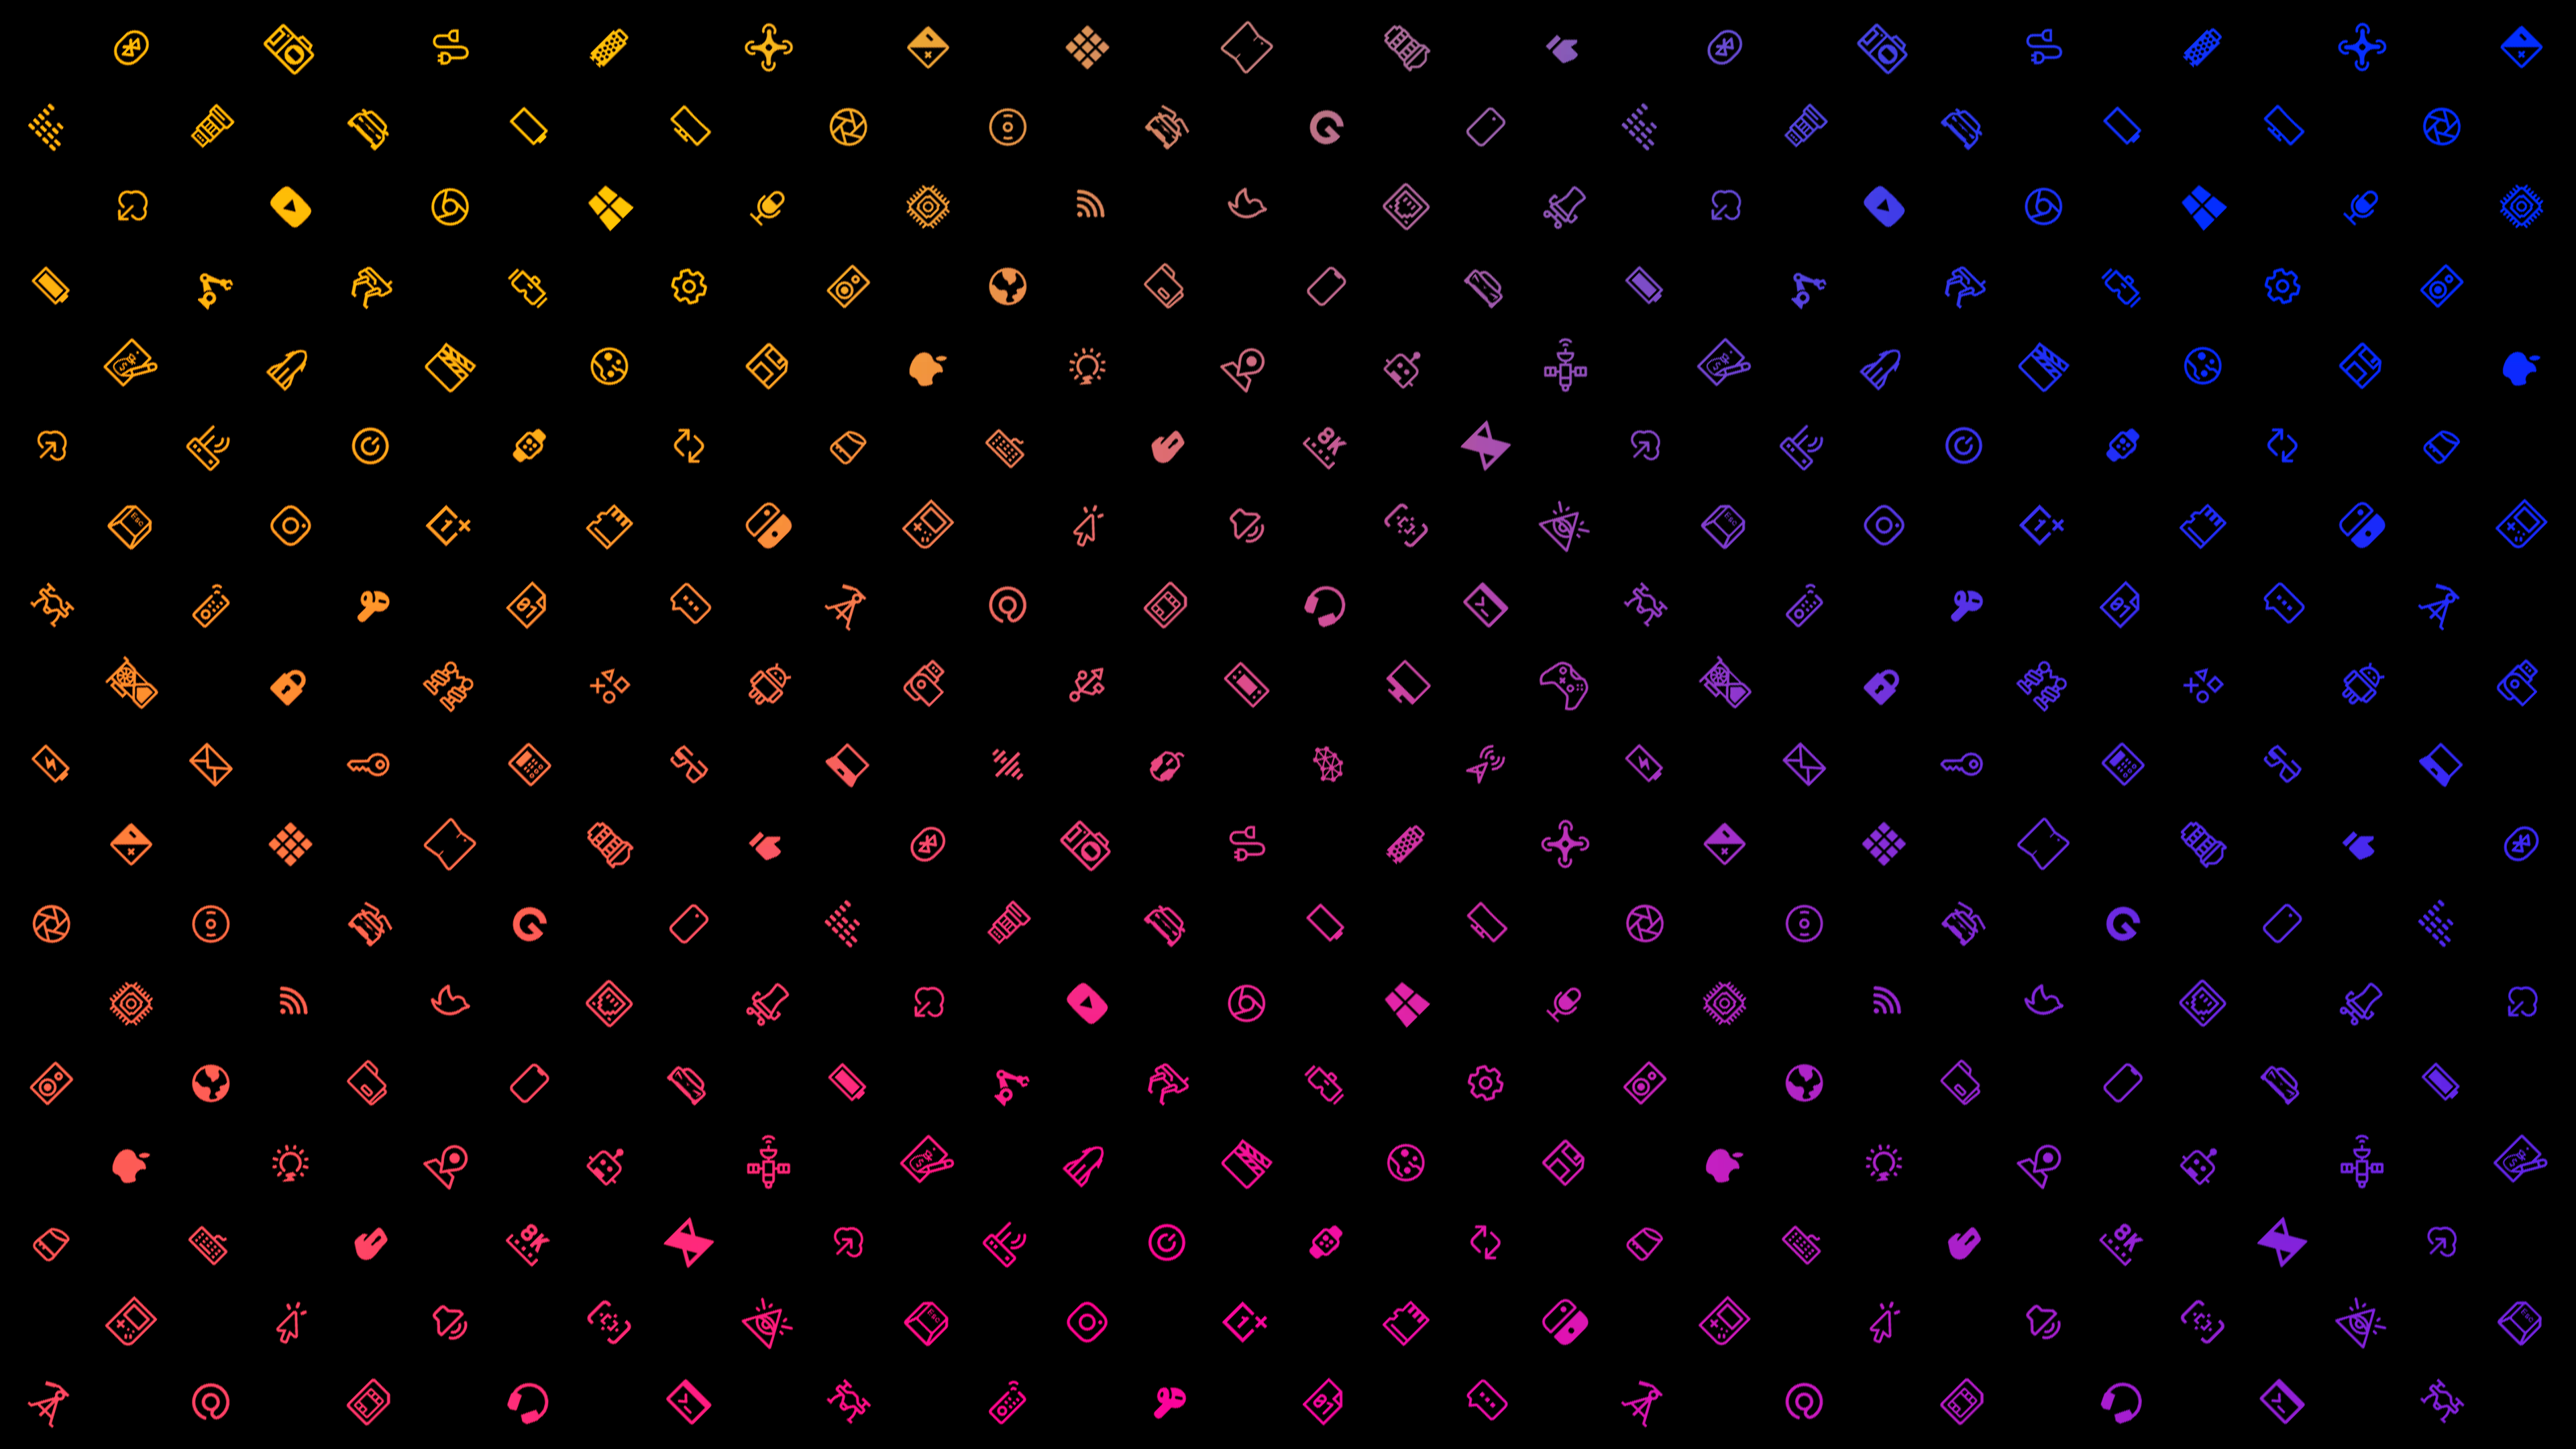 Mkbhd Icons Wallpapers Wallpaper Cave 5811